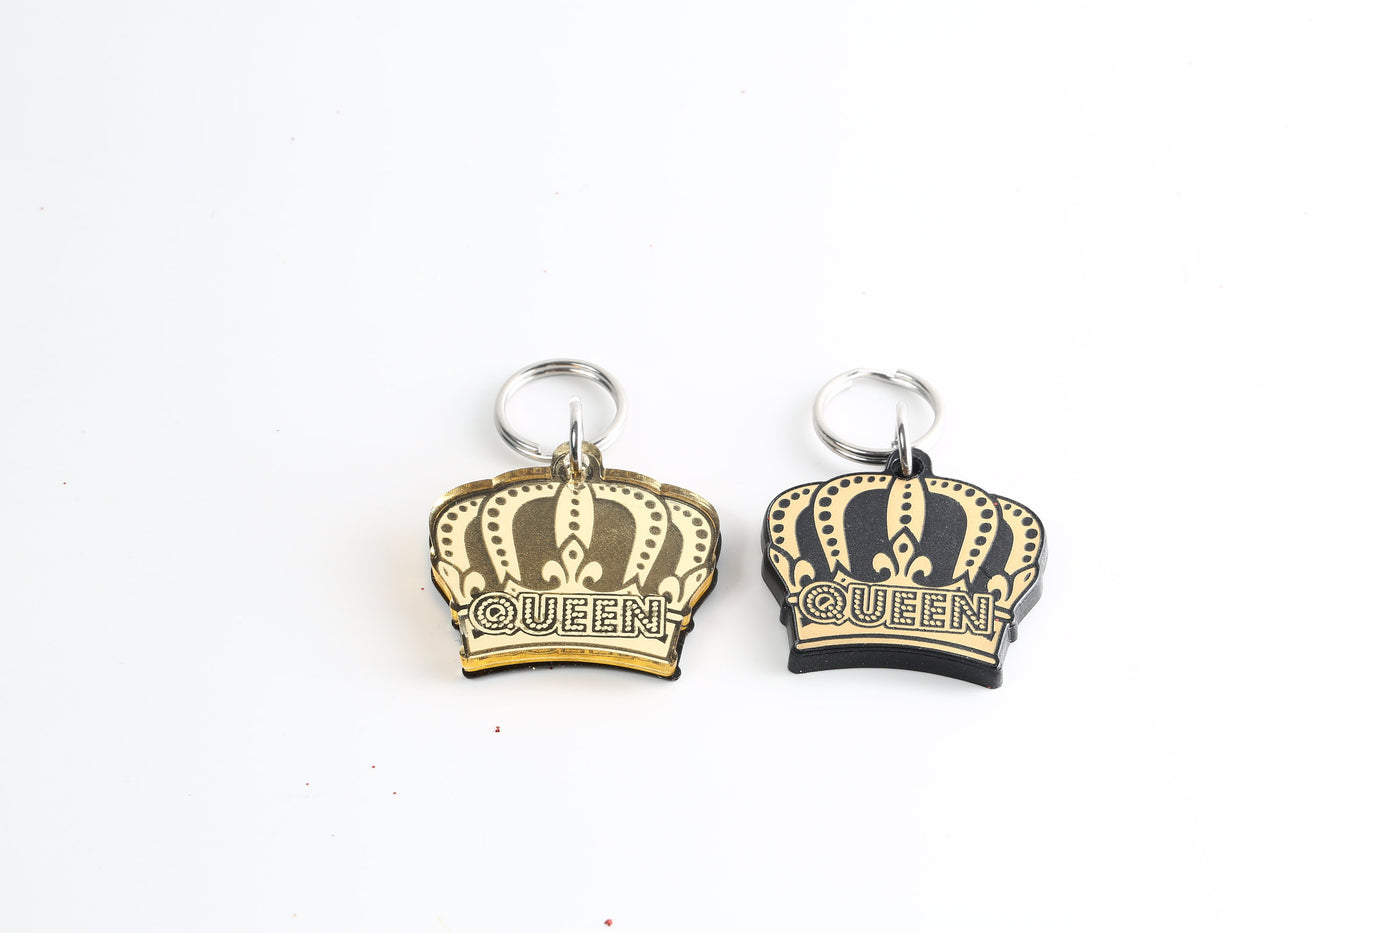 Crown Dog Tag - Dog Tag for Dogs - Pet ID - King - Queen Per ID - Royal Pet Tag - Personalized - Collar Tag